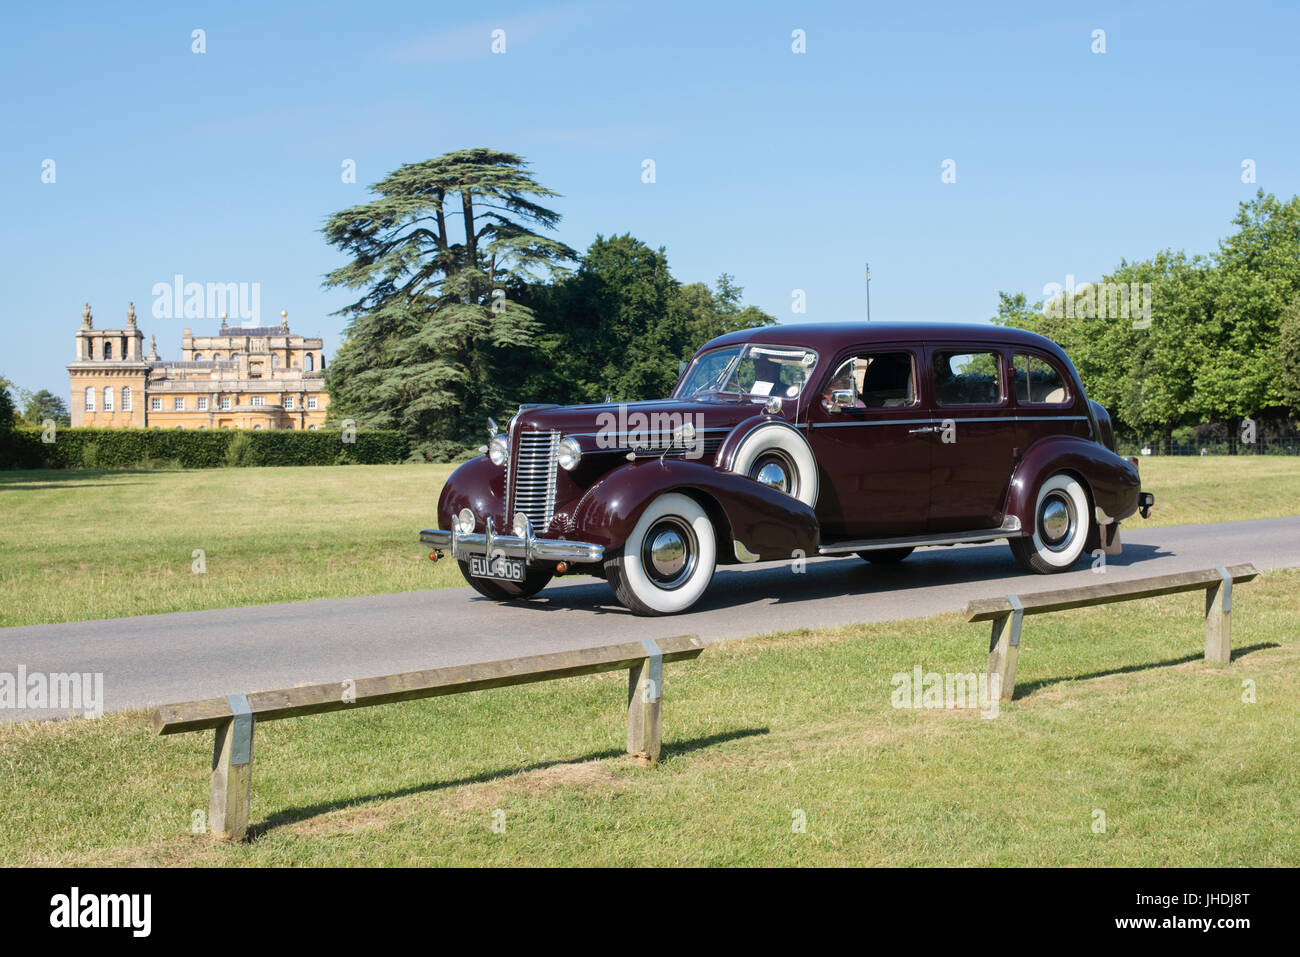 1938 Buick Series 90 Limited at Rally of the Giants american car show, Blenheim palace, Oxfordshire, England. Classic vintage American car Stock Photo